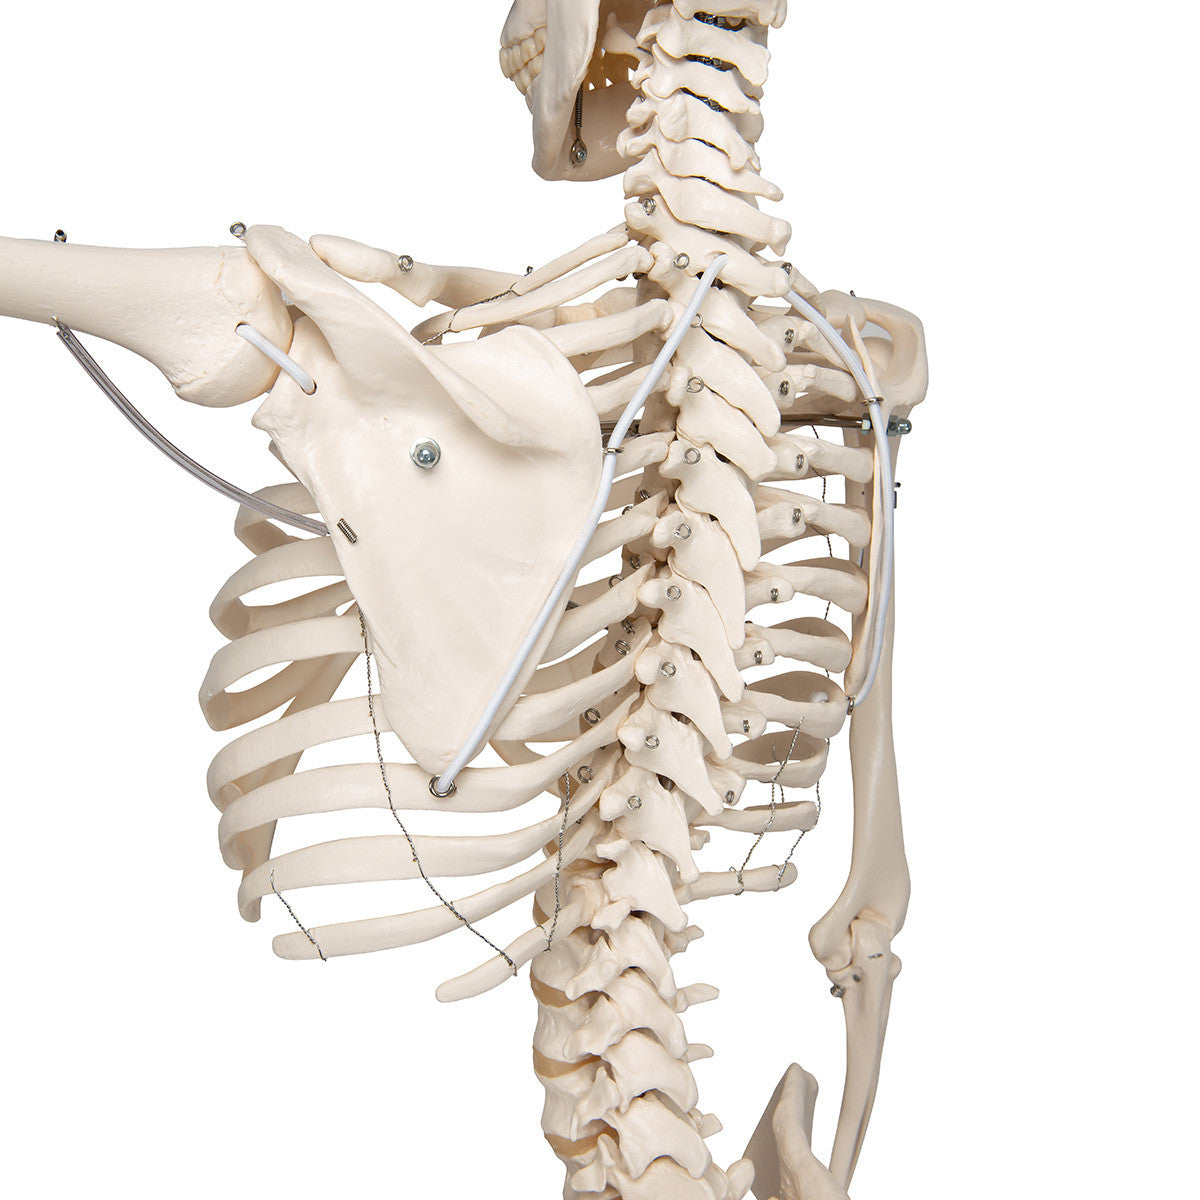 a15-3_06_1200_1200_physiological-human-skeleton-model-phil-on-hanging-stand-3b-smart-anatomy__36840.1589753229.1280.1280.jpg